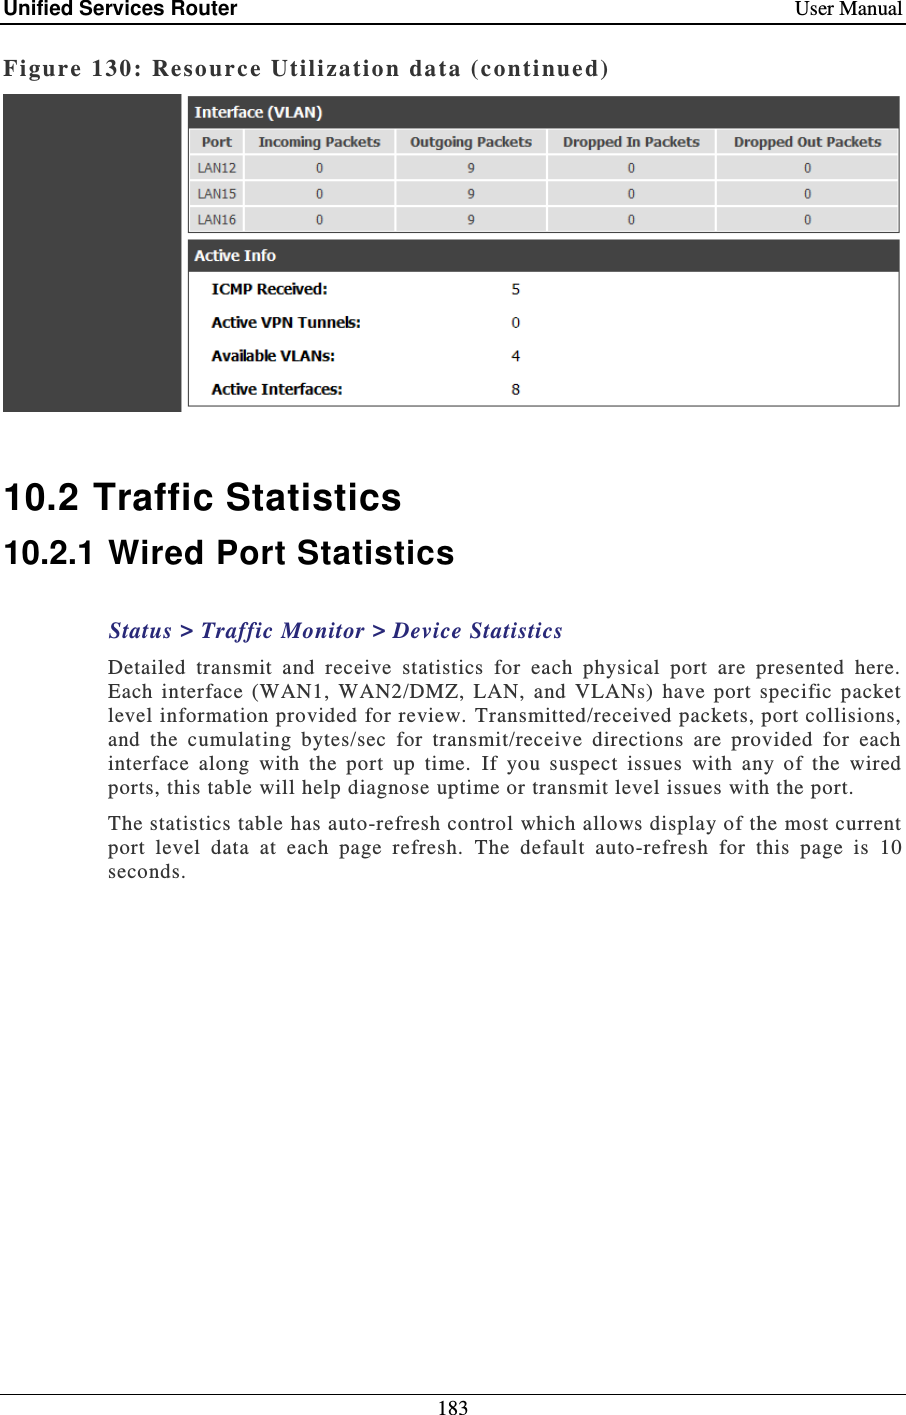 Unified Services Router    User Manual 183  Figure 130: Resource Utilization data (continue d)    10.2 Traffic Statistics 10.2.1 Wired Port Statistics Status &gt; Traffic Monitor &gt; Device Statistics Detailed  transmit  and  receive  statistics  for  each  physical  port  are  presented  here.  Each  interface  (WAN1,  WAN2/DMZ,  LAN,  and  VLANs)  have  port  specific  packet level information provided for review. Transmitted/received packets, port collisions, and  the  cumulating  bytes/sec  for  transmit/receive  directions  are  provided  for  each interface  along  with  the  port  up  time.  If  you  suspect  issues  with  any  of  the  wired ports, this table will help diagnose uptime or transmit level issues with the port.   The statistics table has auto-refresh control which allows display of the most current port  level  data  at  each  page  refresh.  The  default  auto-refresh  for  this  page  is  10 seconds.  